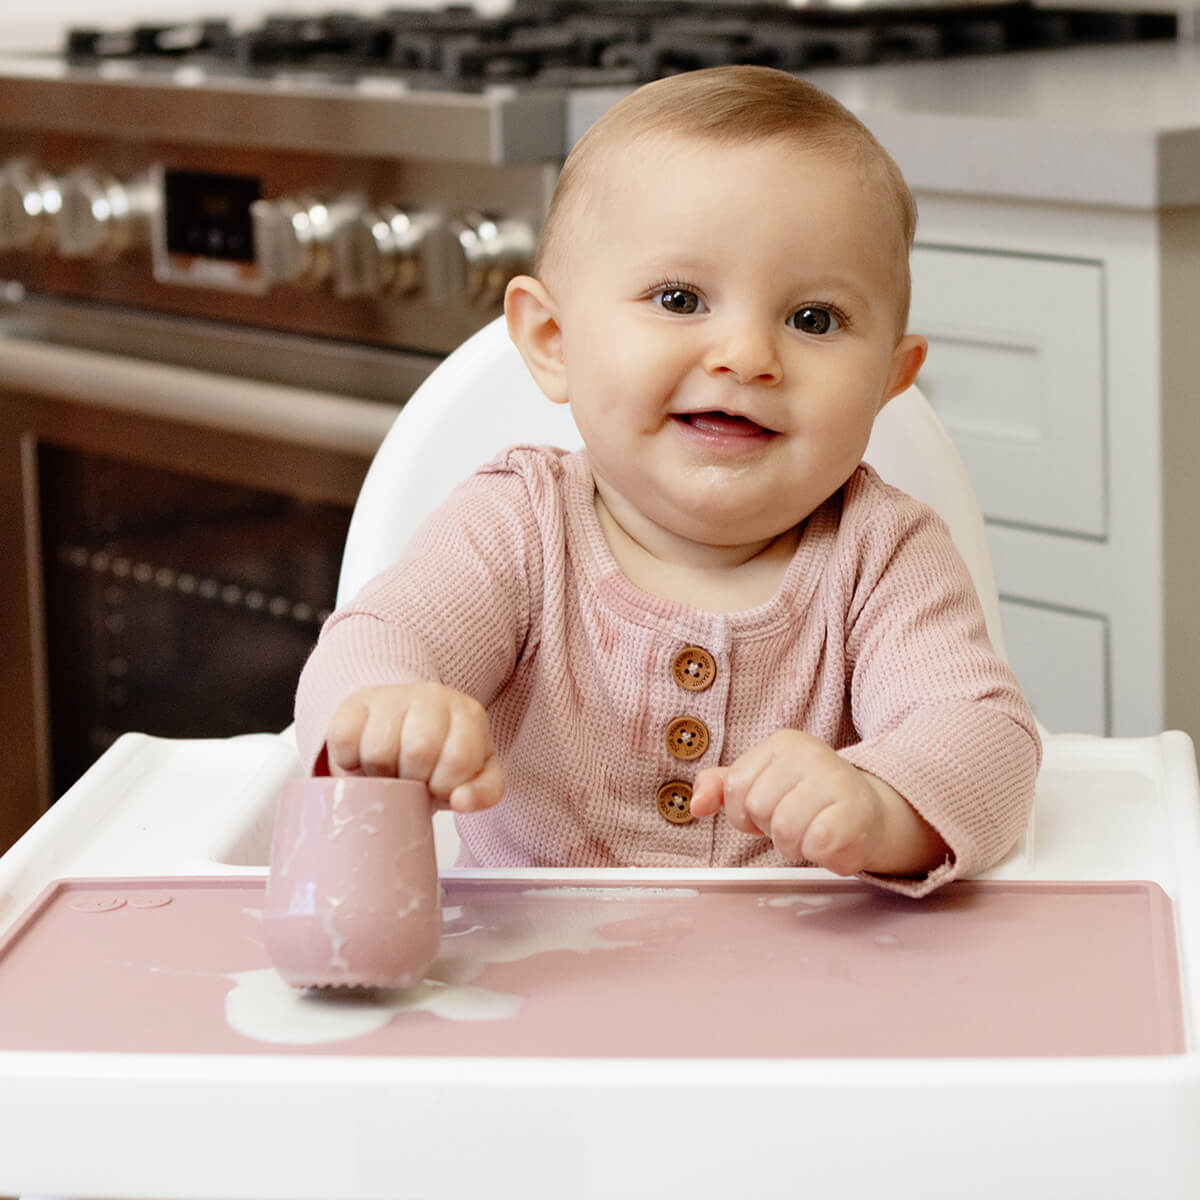 The Tiny Placemat in Blush is a non-slip, silicone placemat that fits on most highchair trays